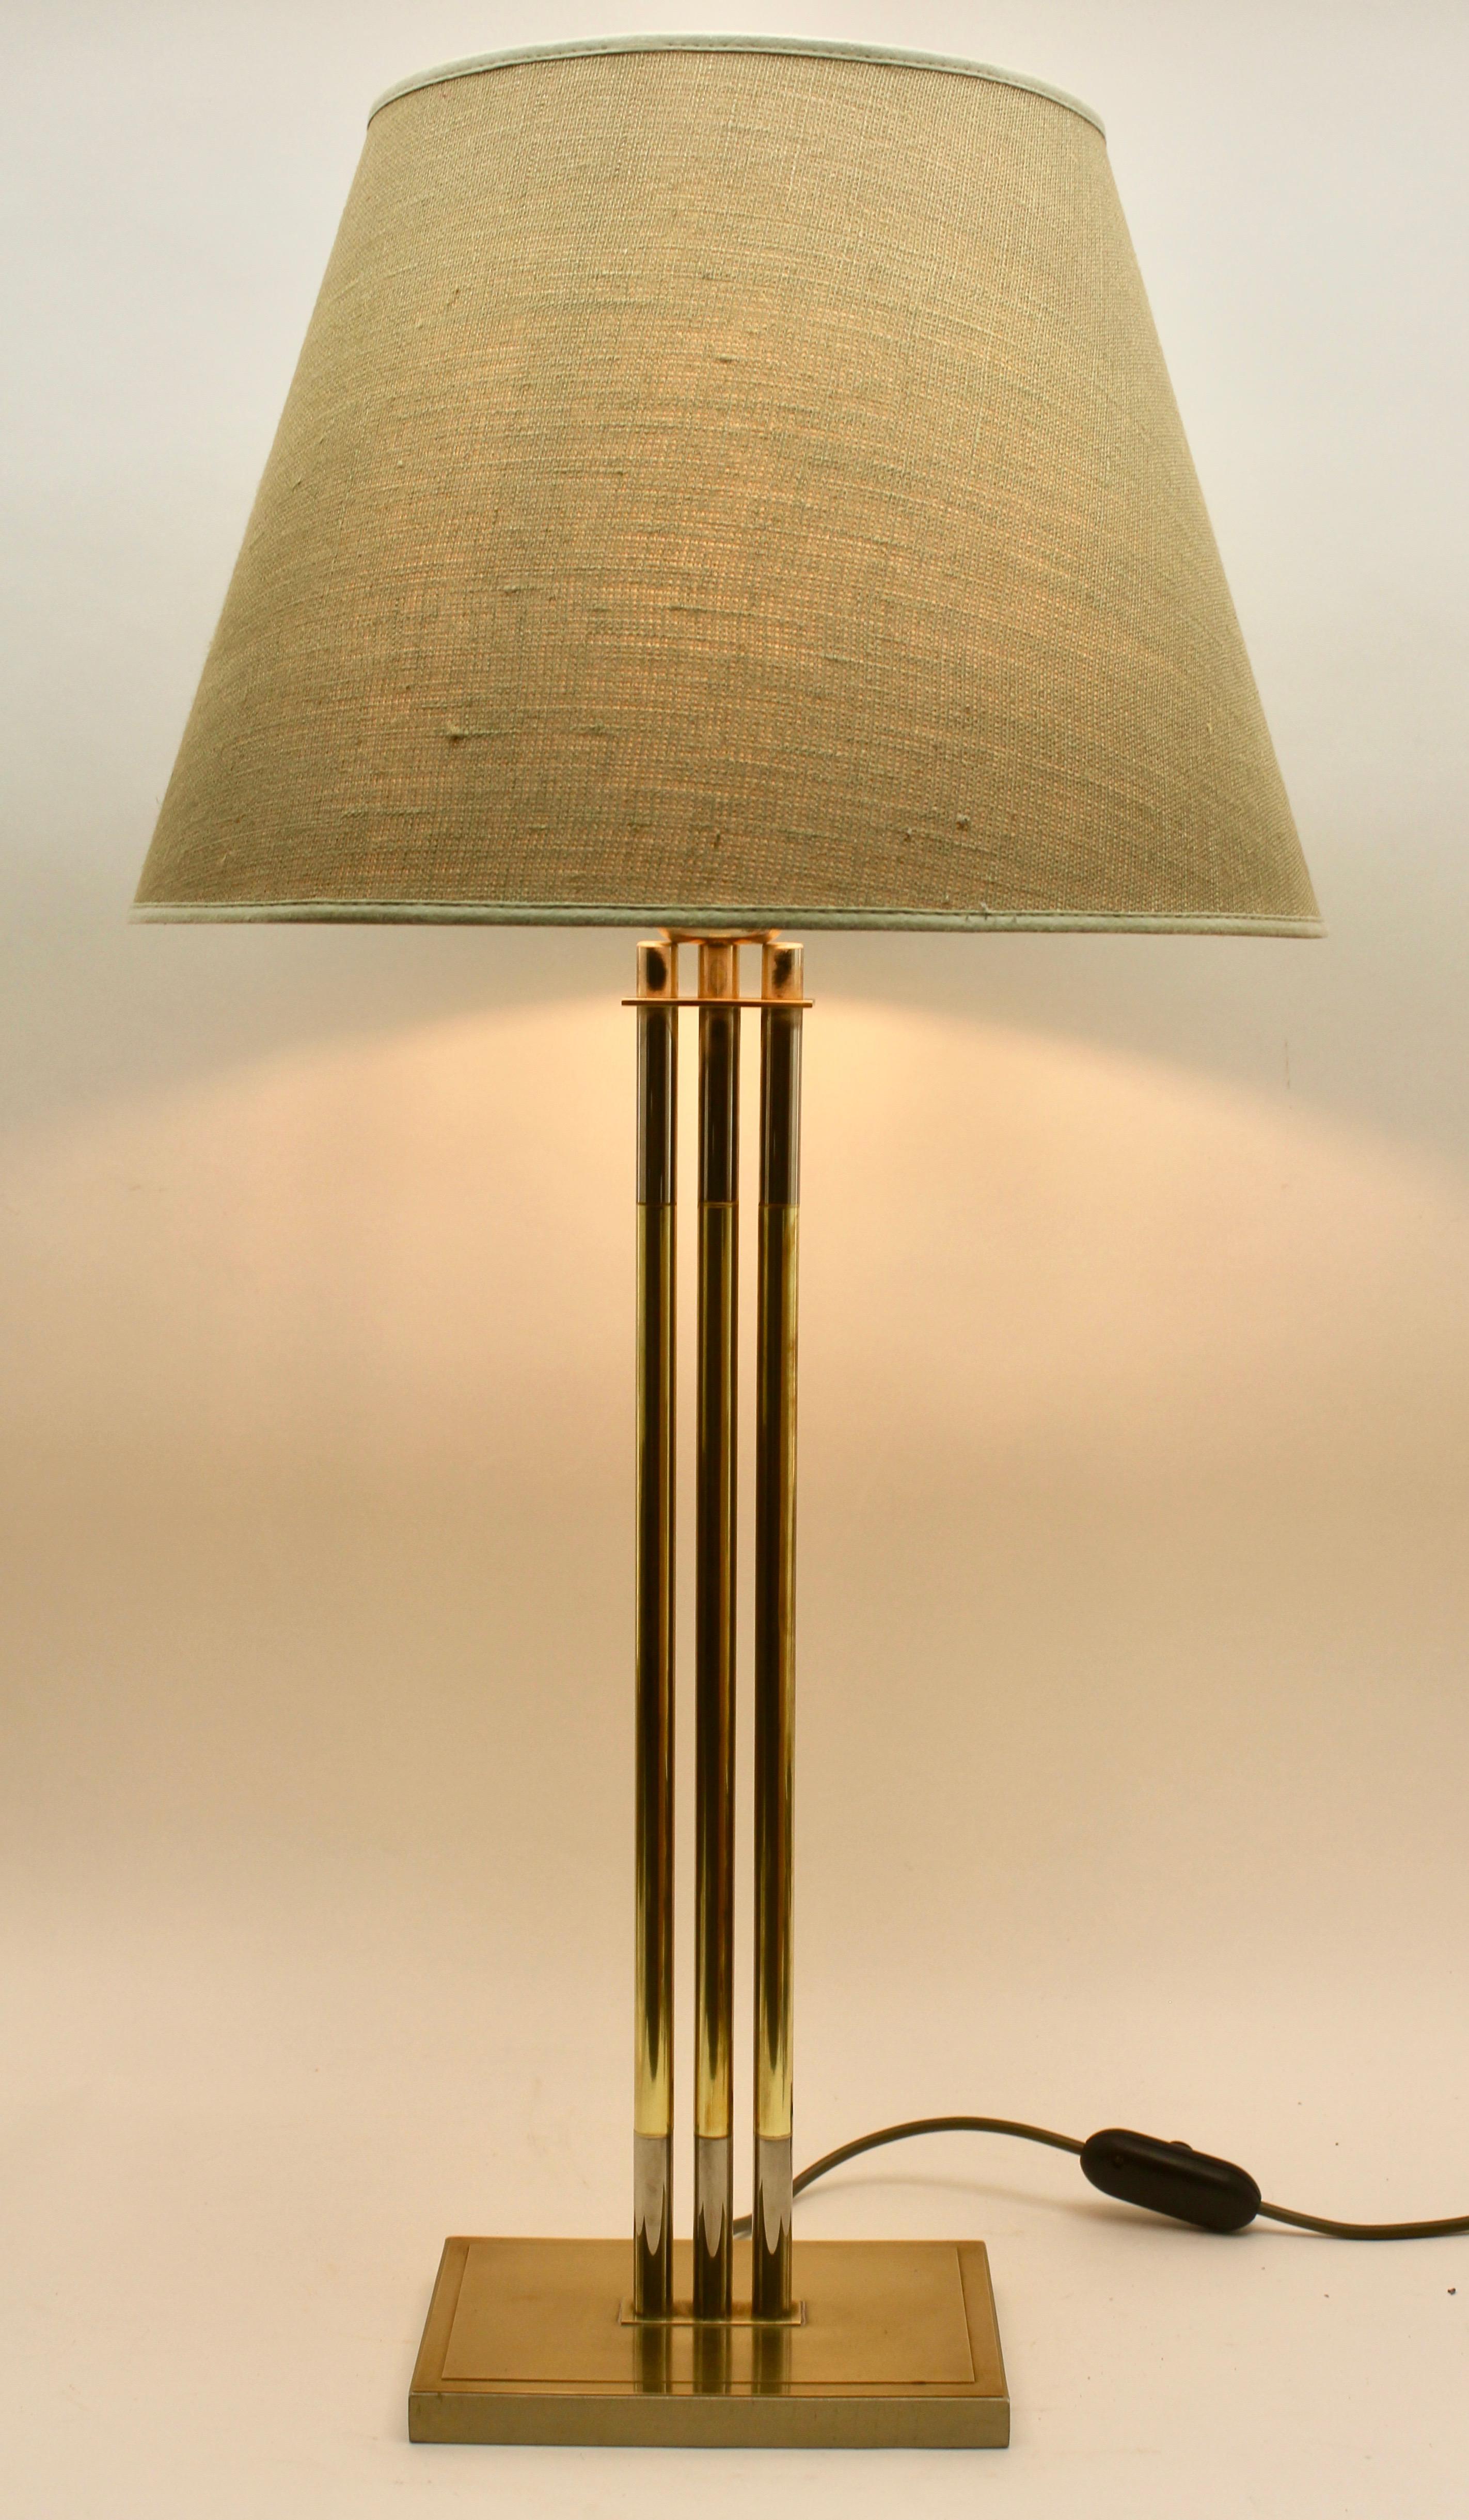 Hollywood Regency Vintage Brass Table Lamp by Willy Rizzo for De Knudt, 'Numbered 3784', 1970s